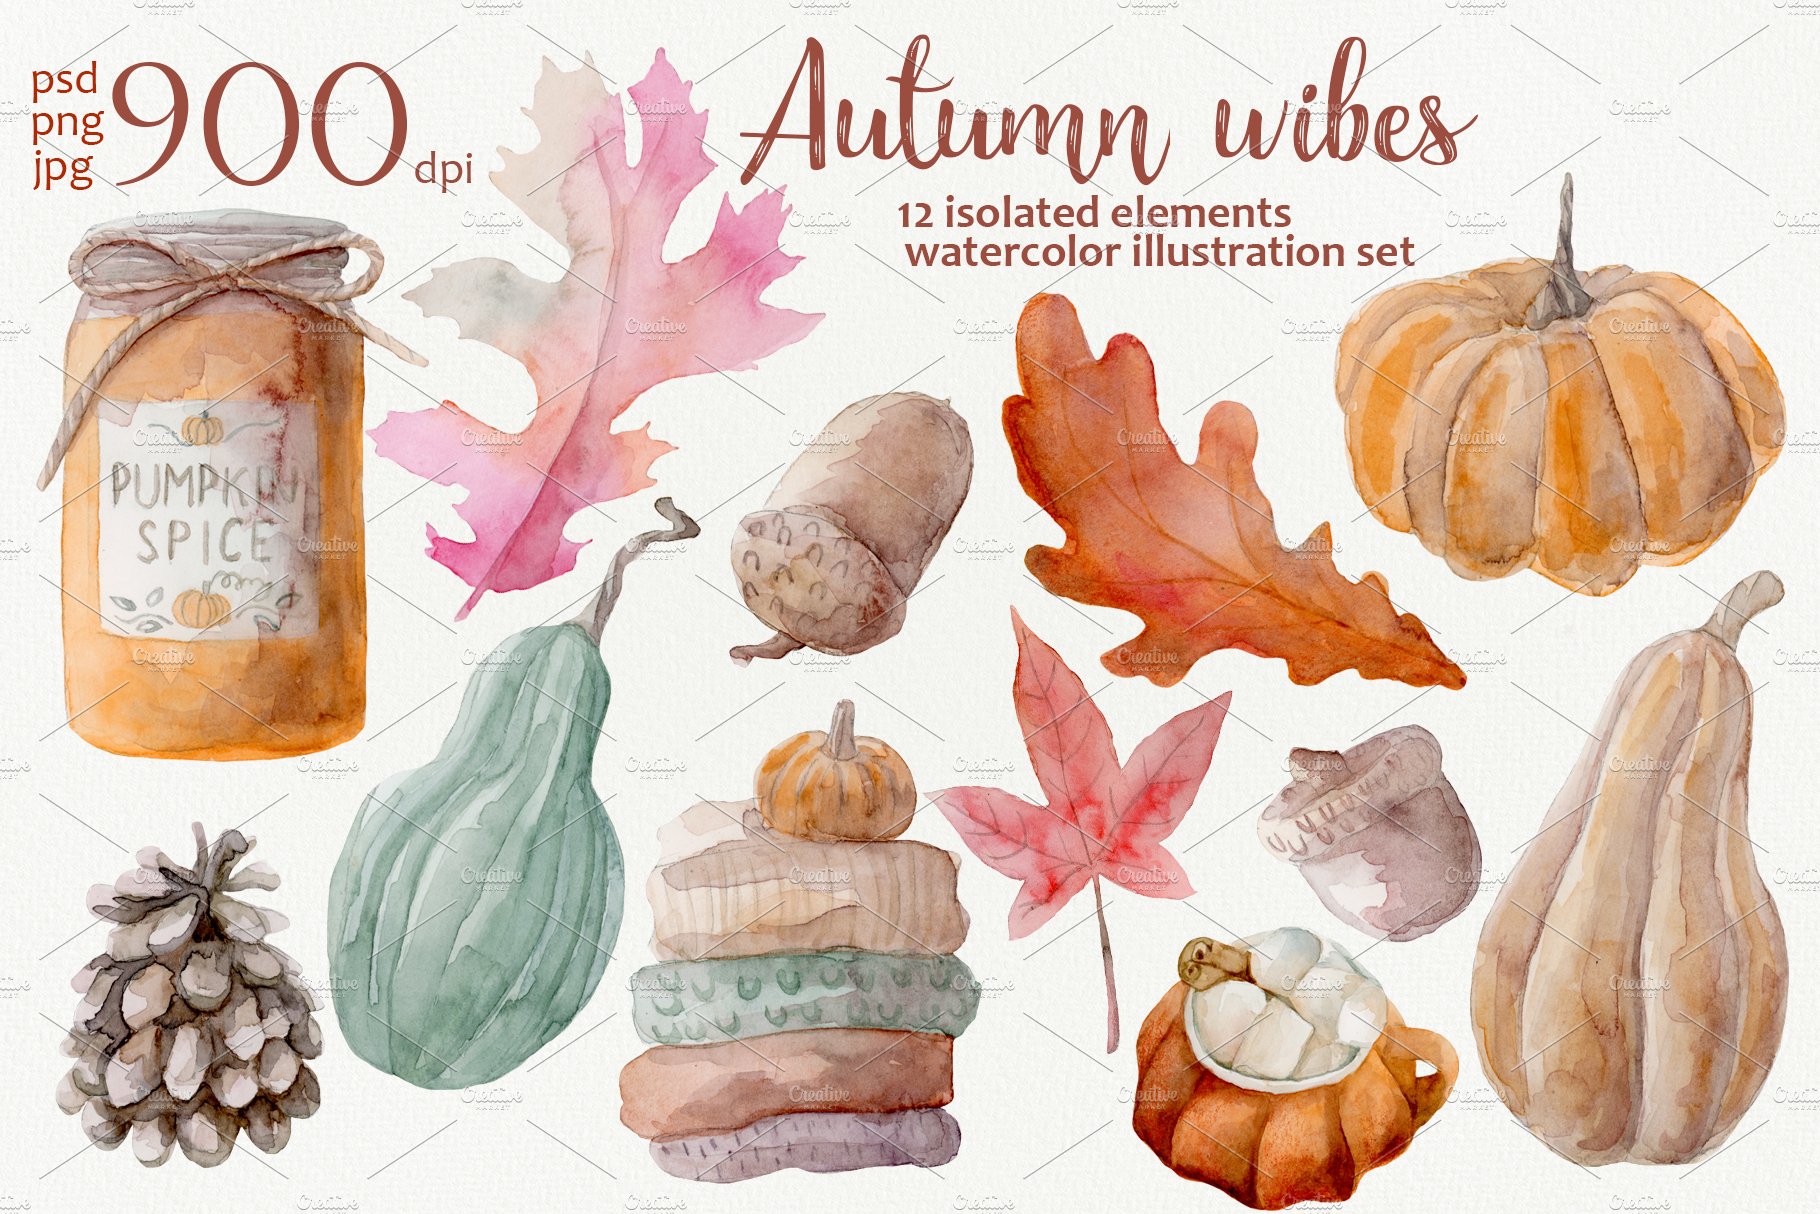 Autumn wibes watercolor set cover image.